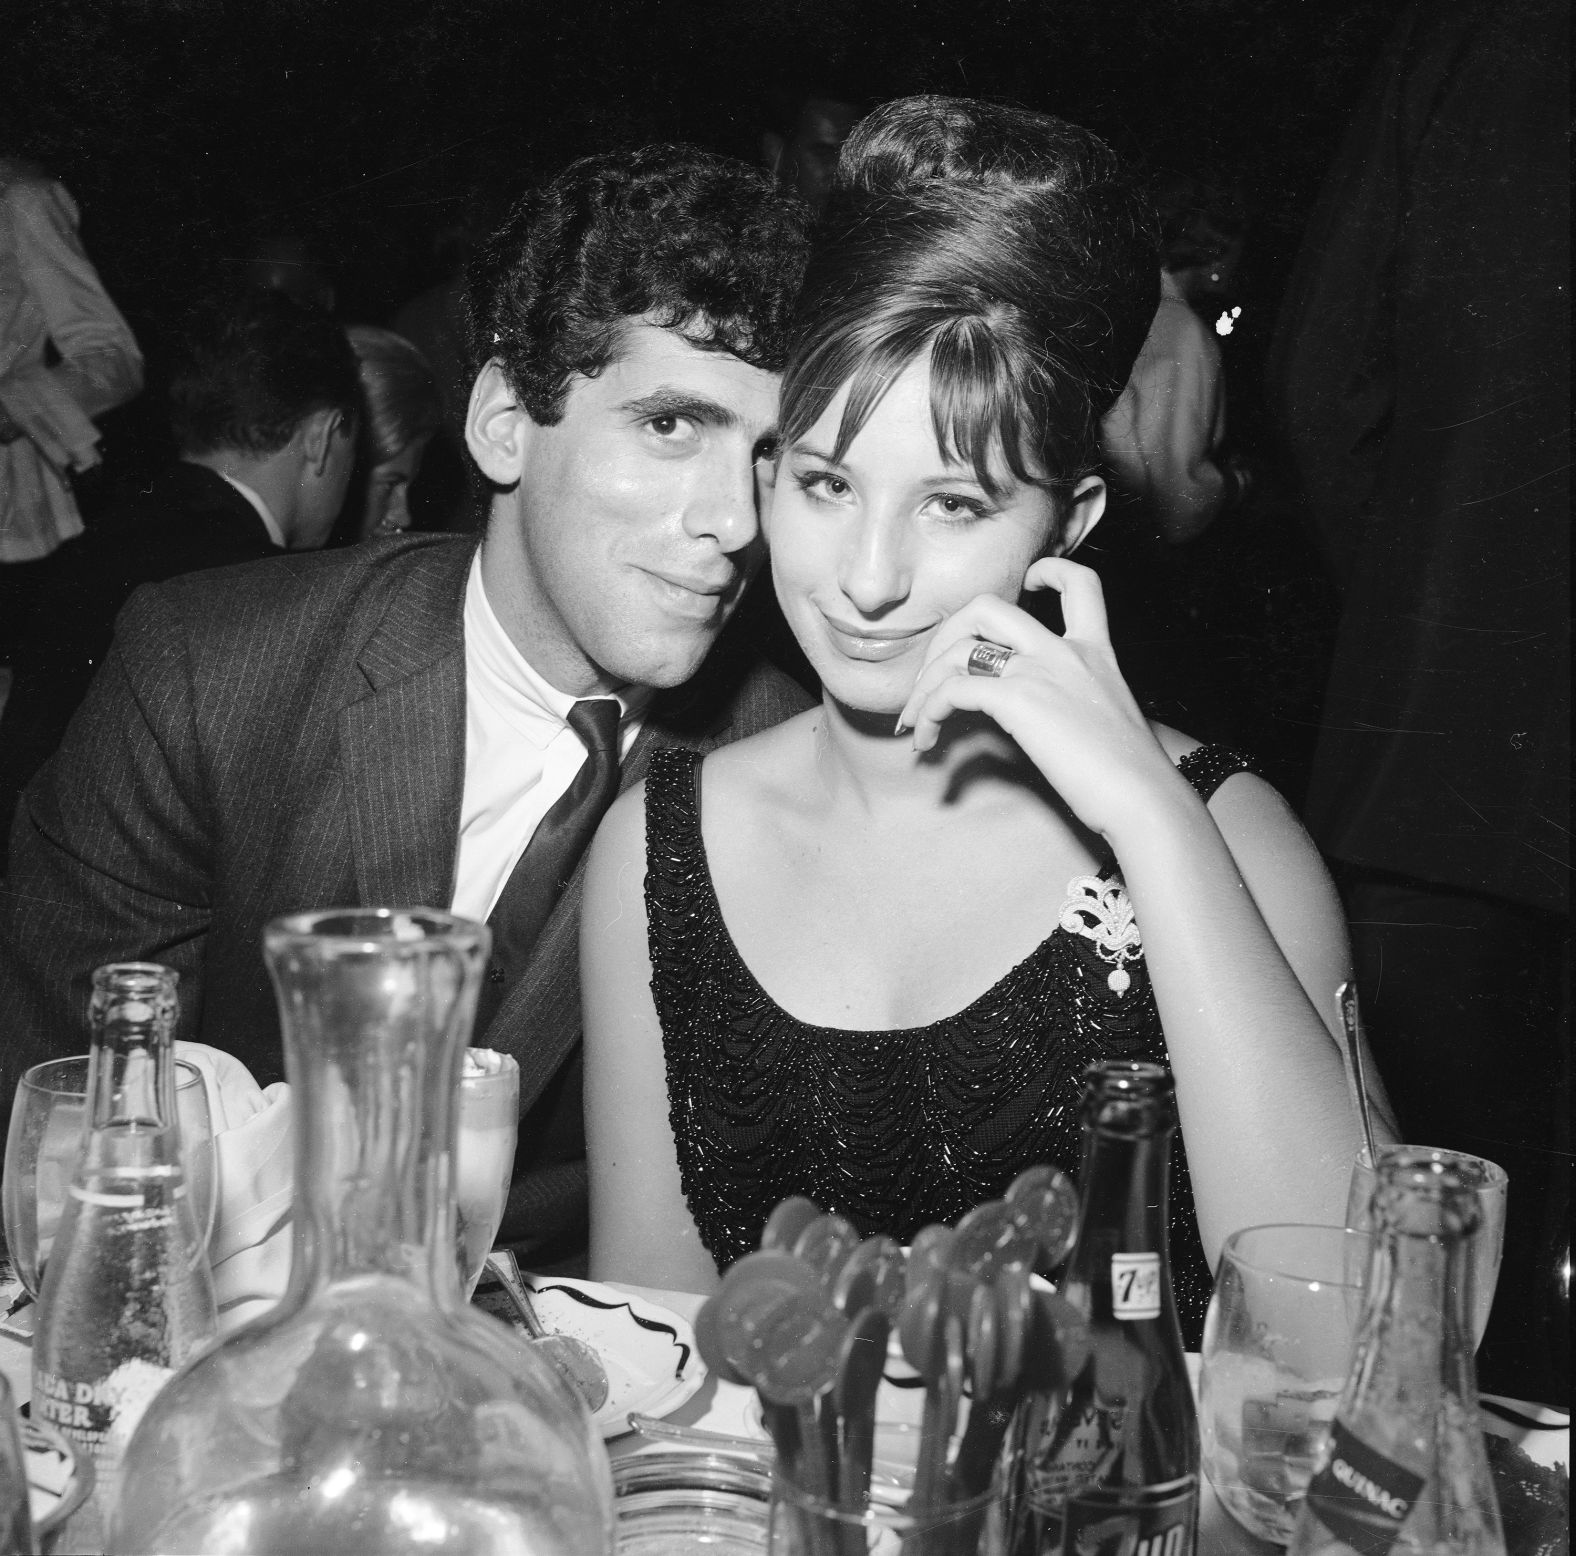 Streisand and actor Elliott Gould met while working together on “I Can Get It For You Wholesale.” They were married from 1963-1971.